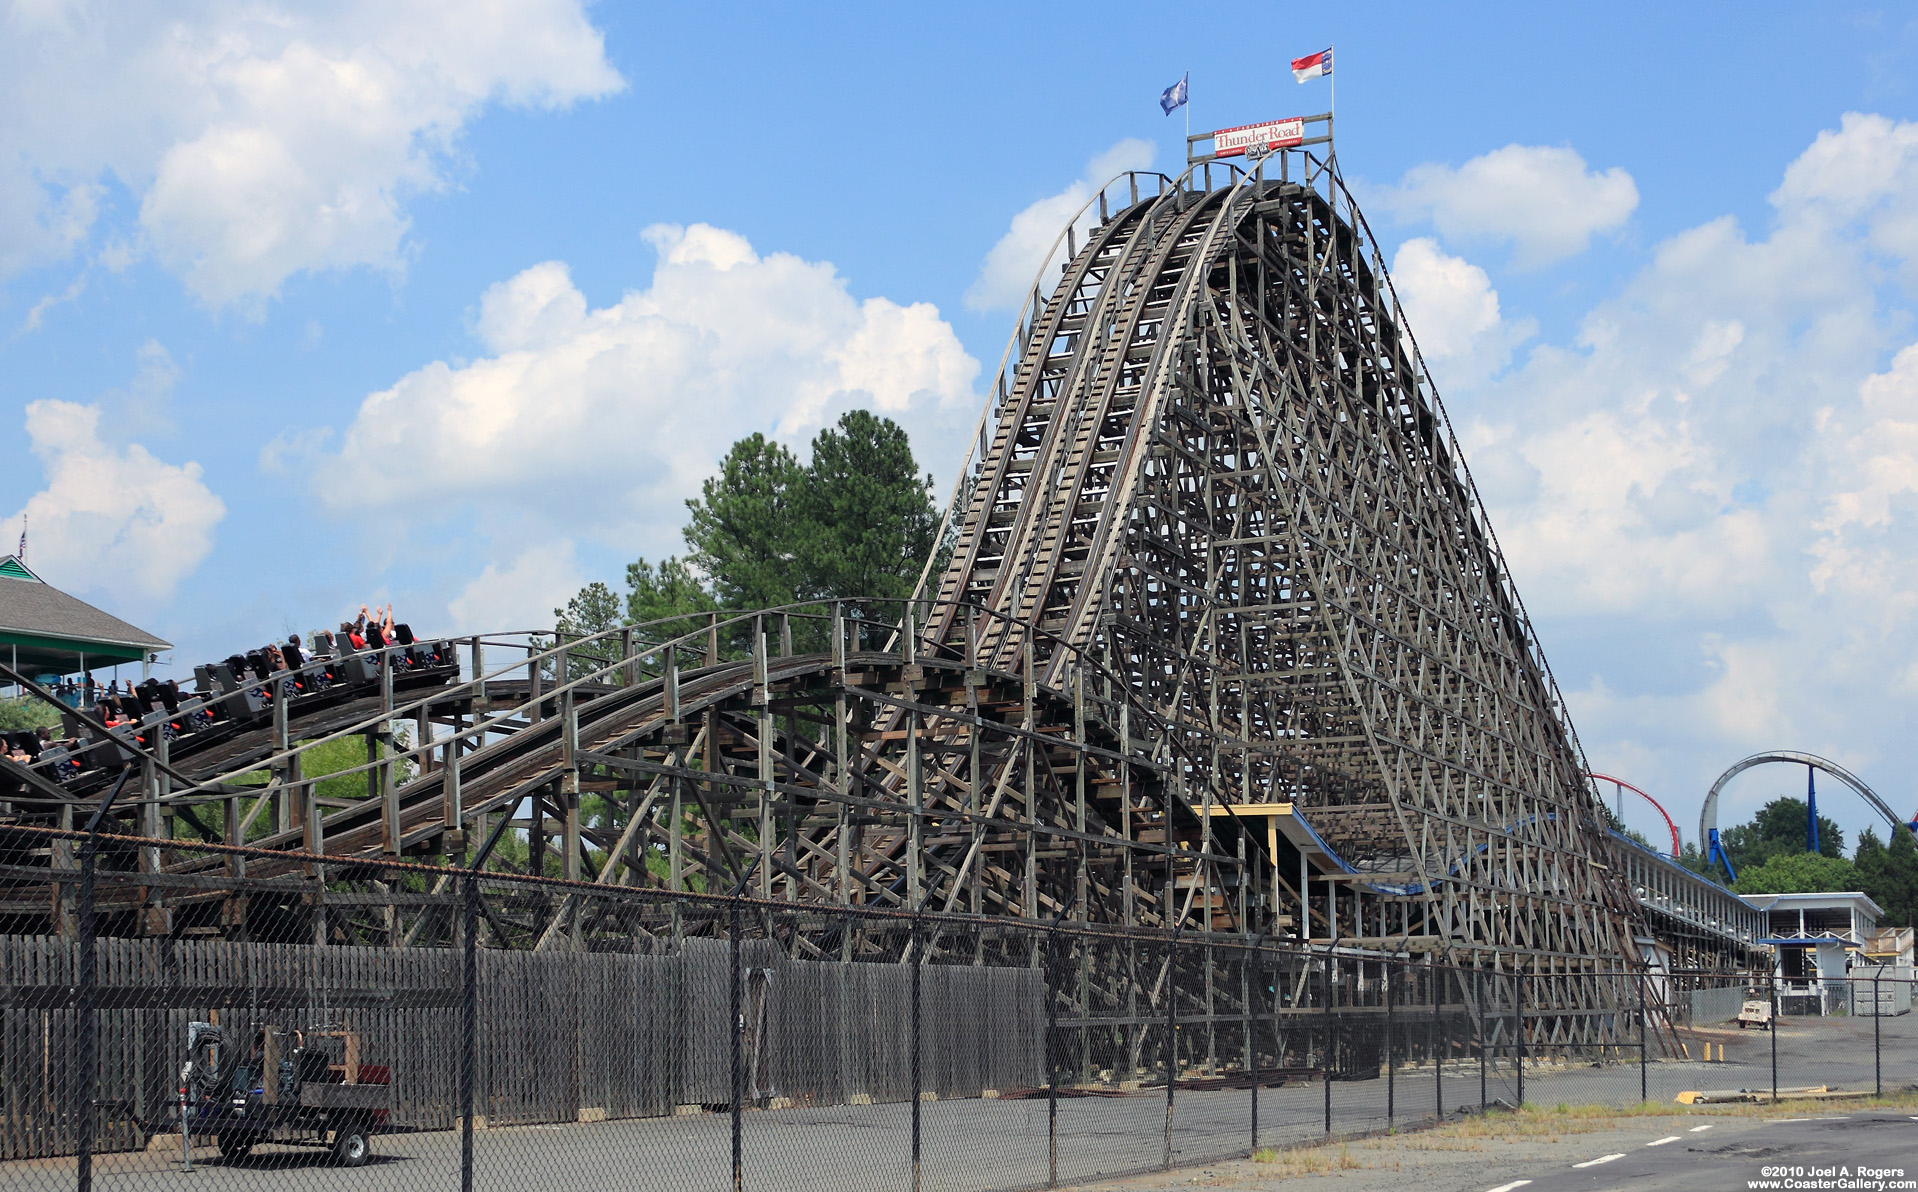 Thunder-road-in-carowinds